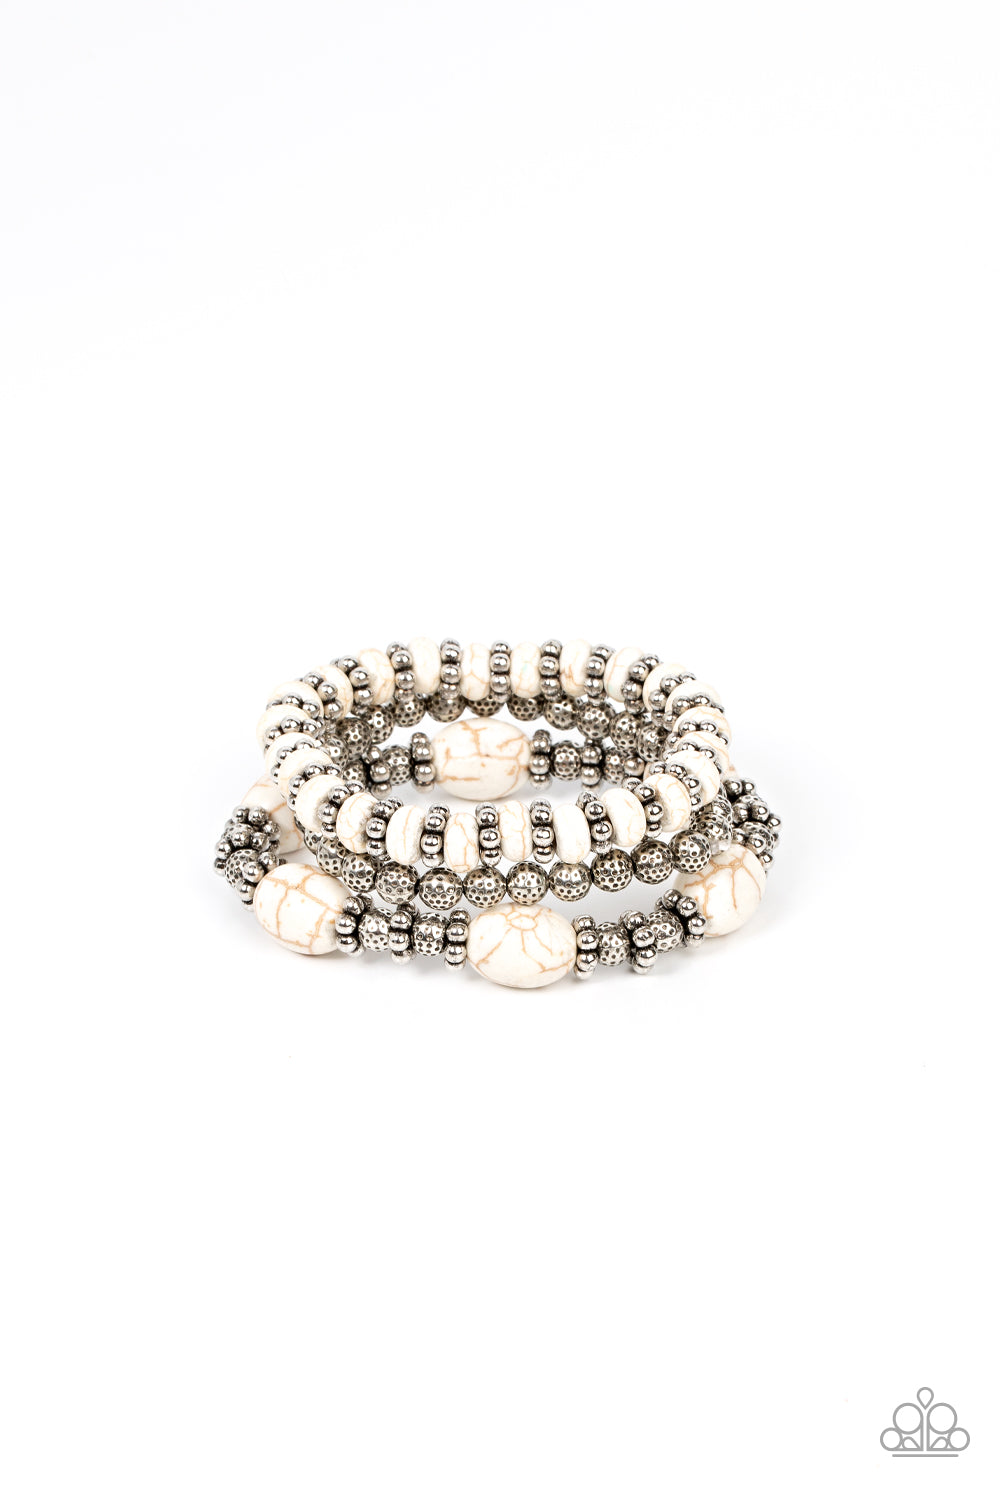 Take by SANDSTORM - White and Antiqued Silver Beads - Paparazzi Accessories